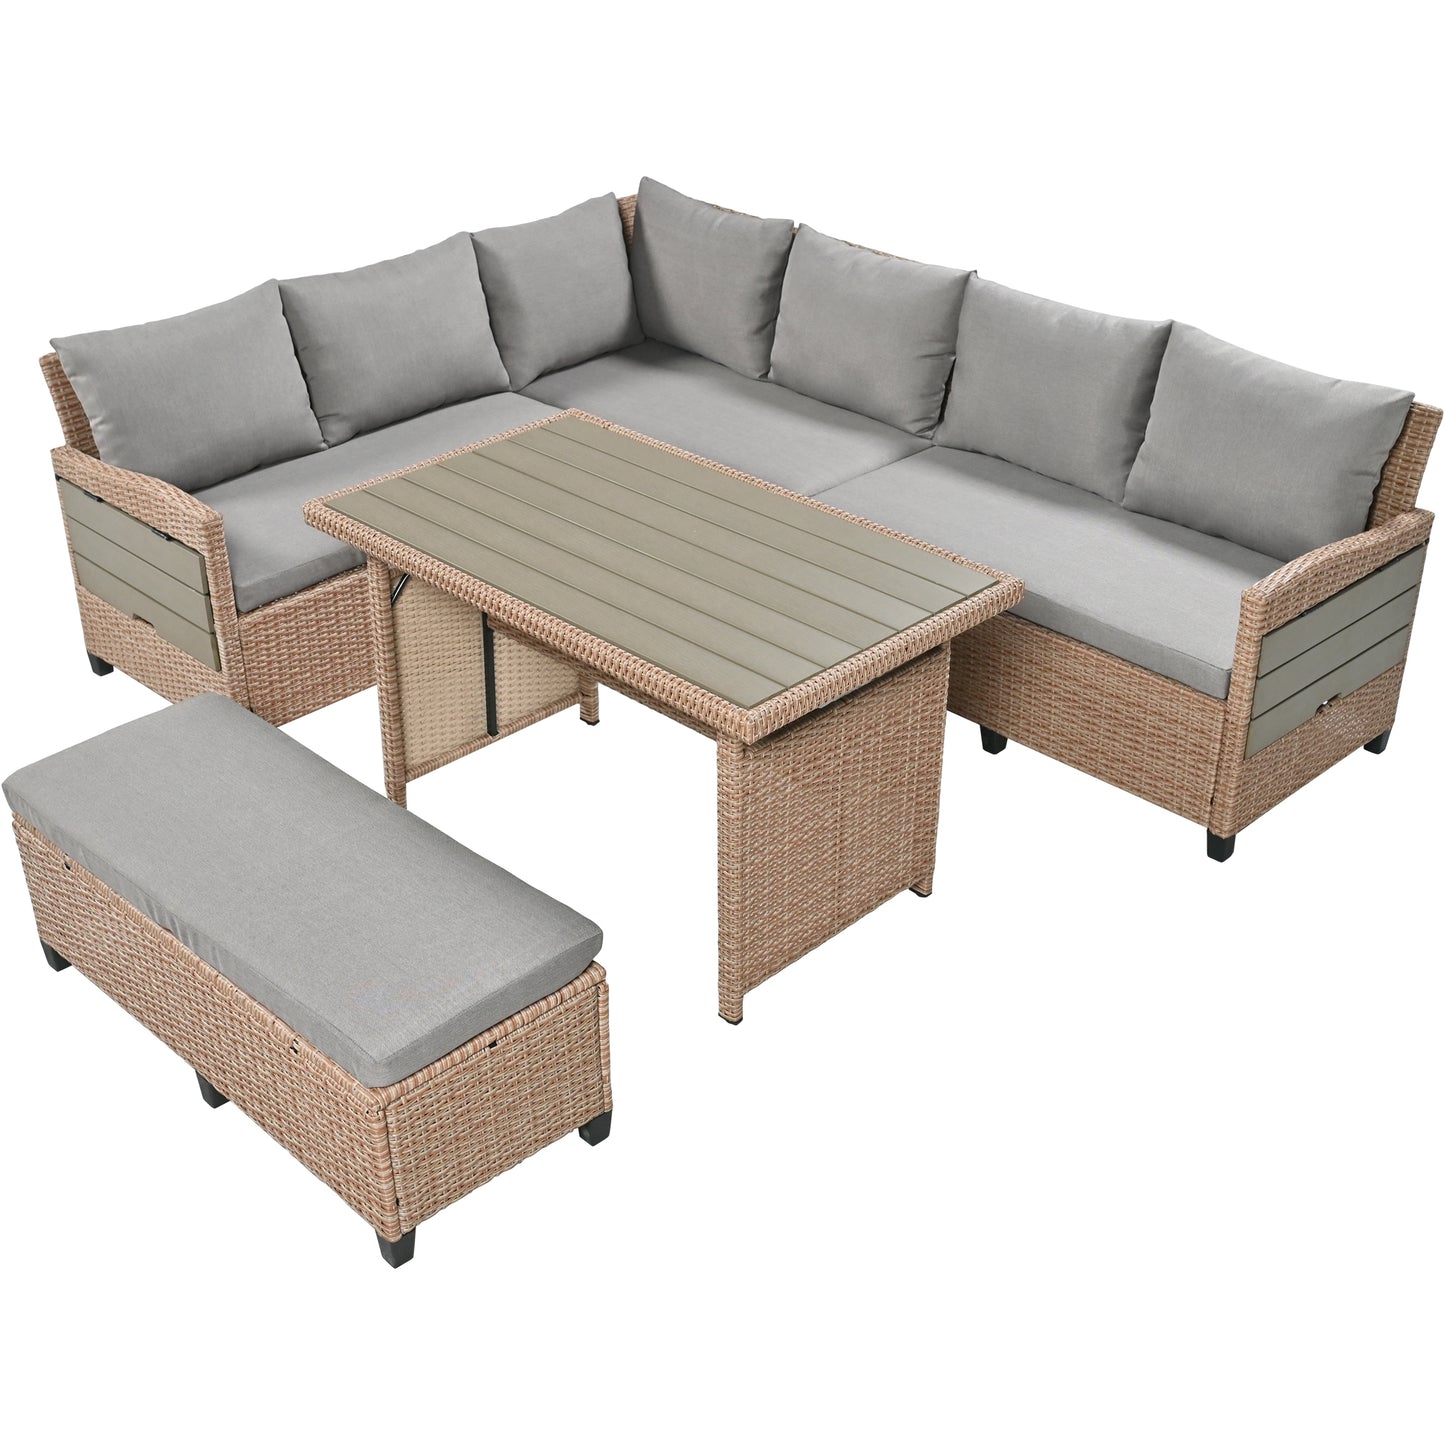 TOMAX 5-Piece Outdoor Patio Rattan Sofa Set, Sectional PE Wicker L-Shaped Garden Furniture Set with 2 Extendable Side Tables, Dining Table and Washable Covers for Backyard, Poolside, Indoor, Brown